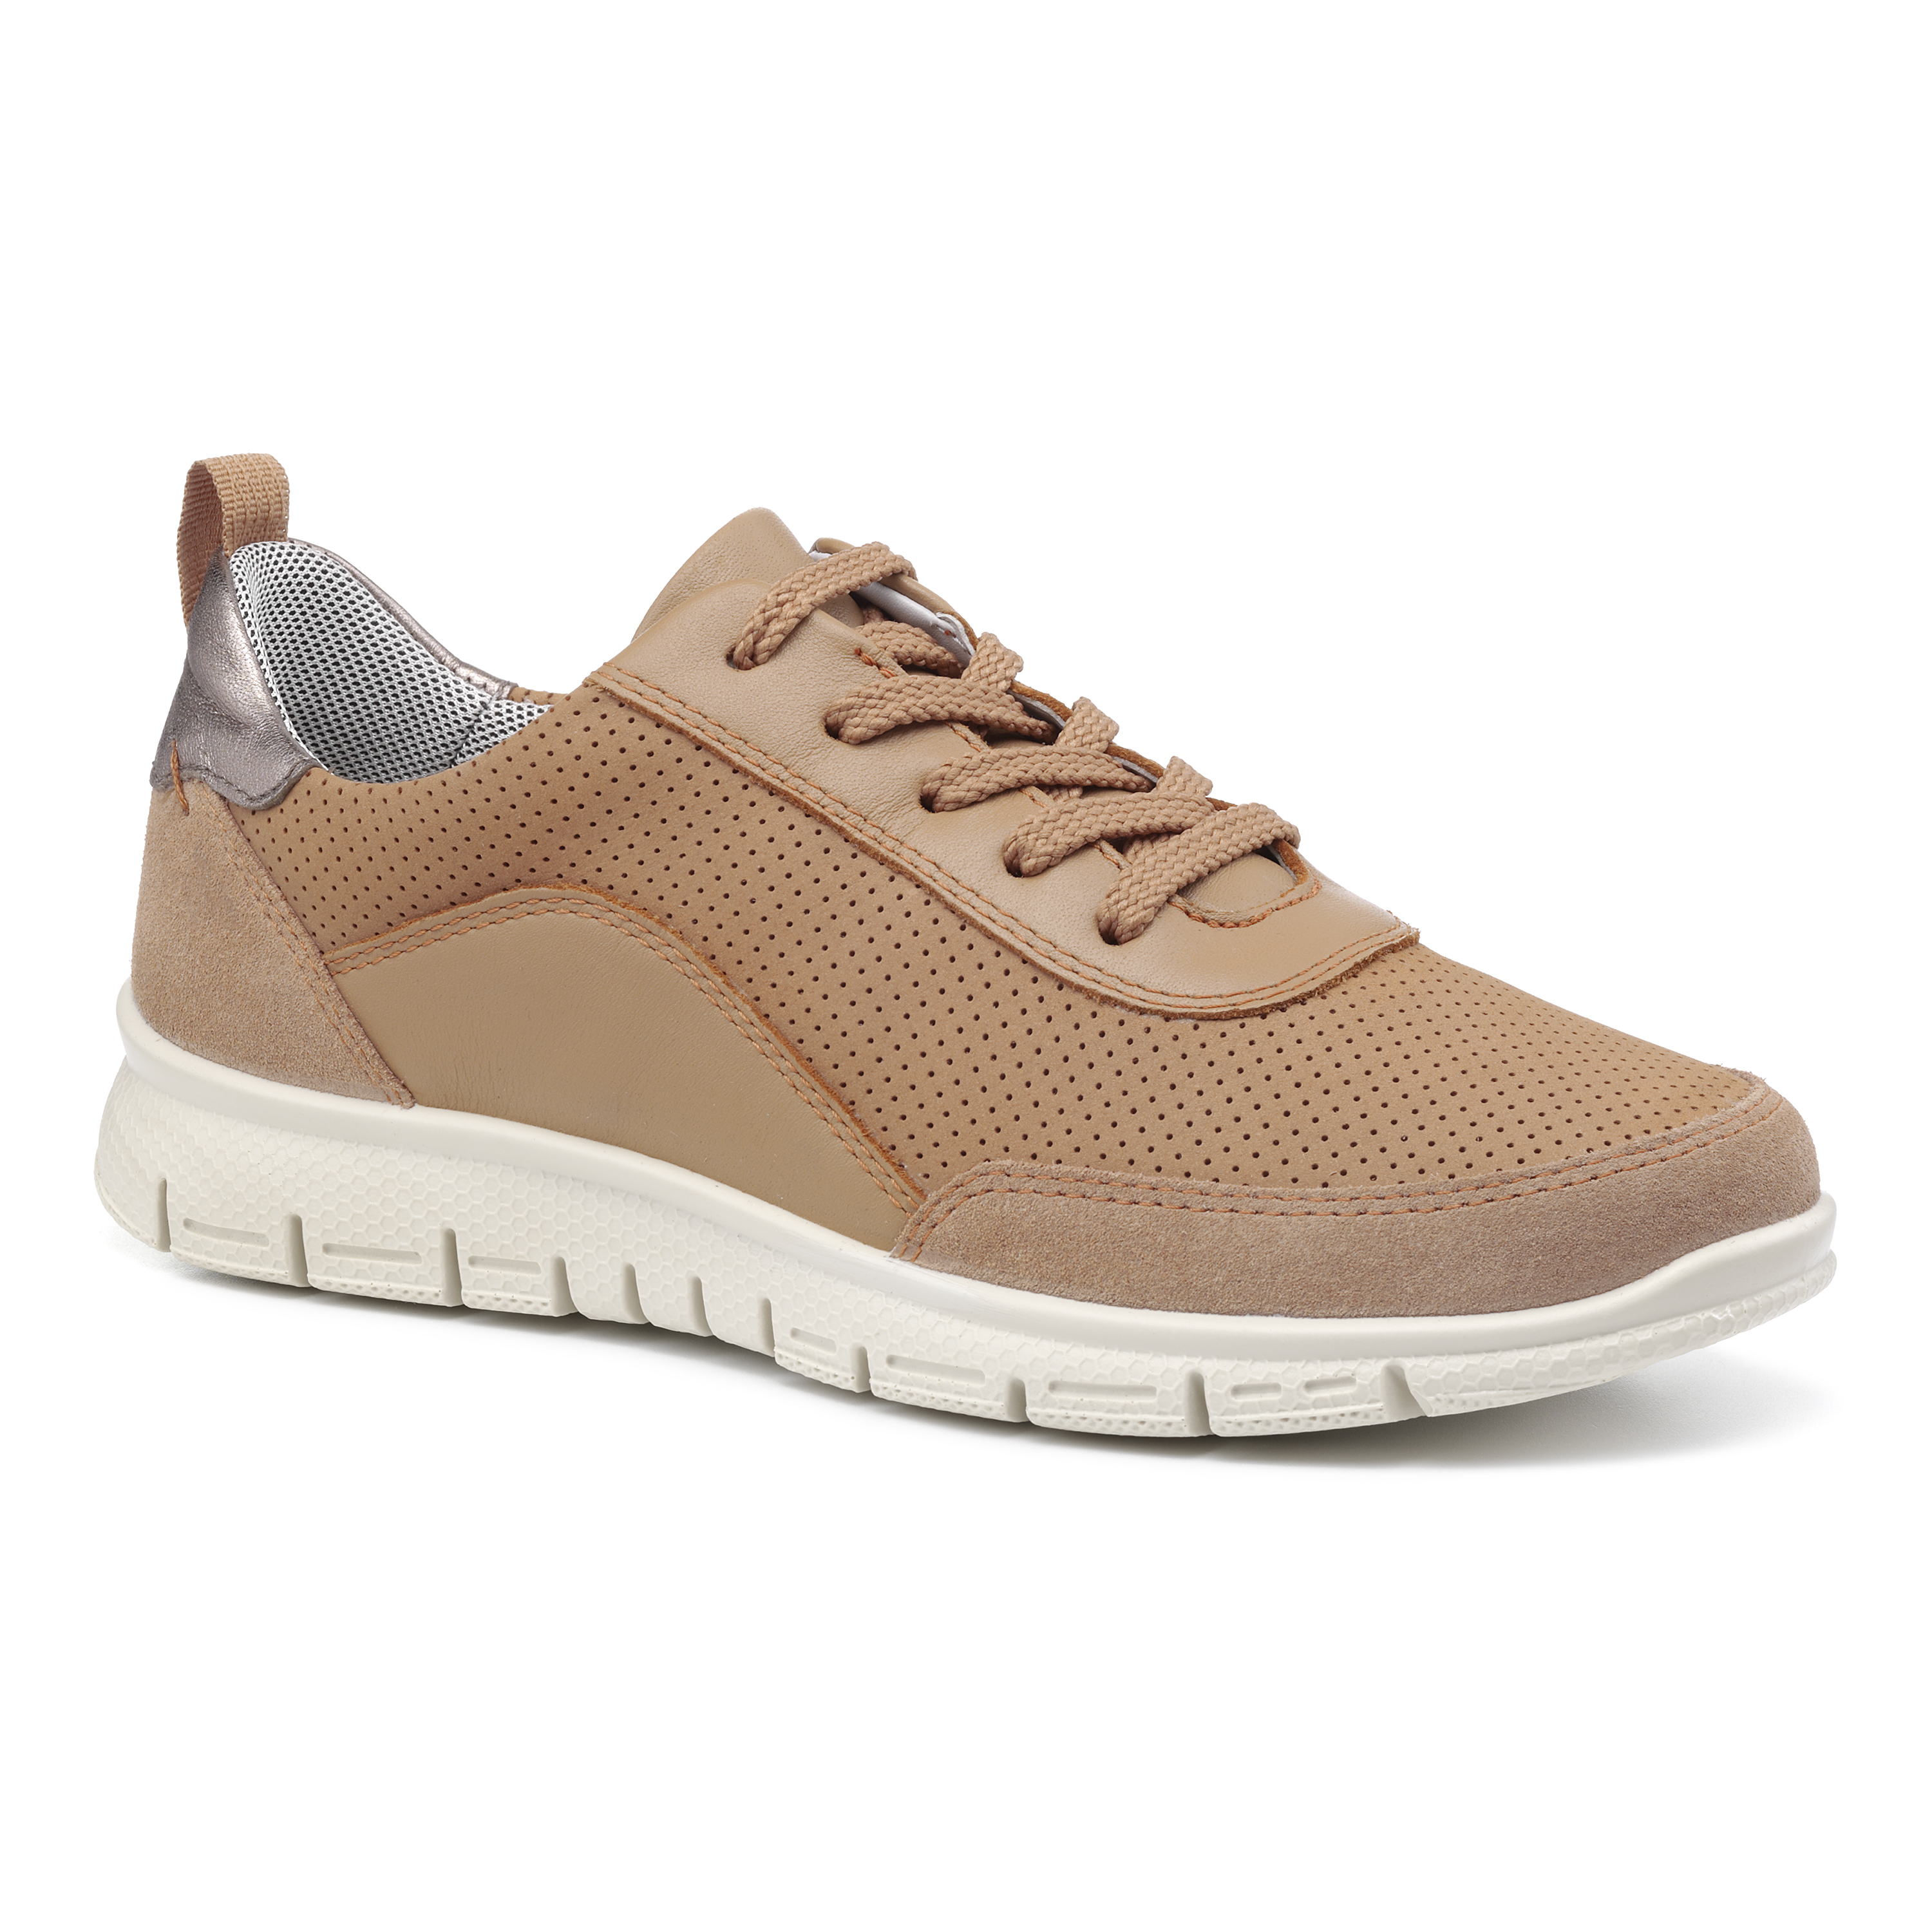 Light Clay | Gravity II Shoes |Hotter UK